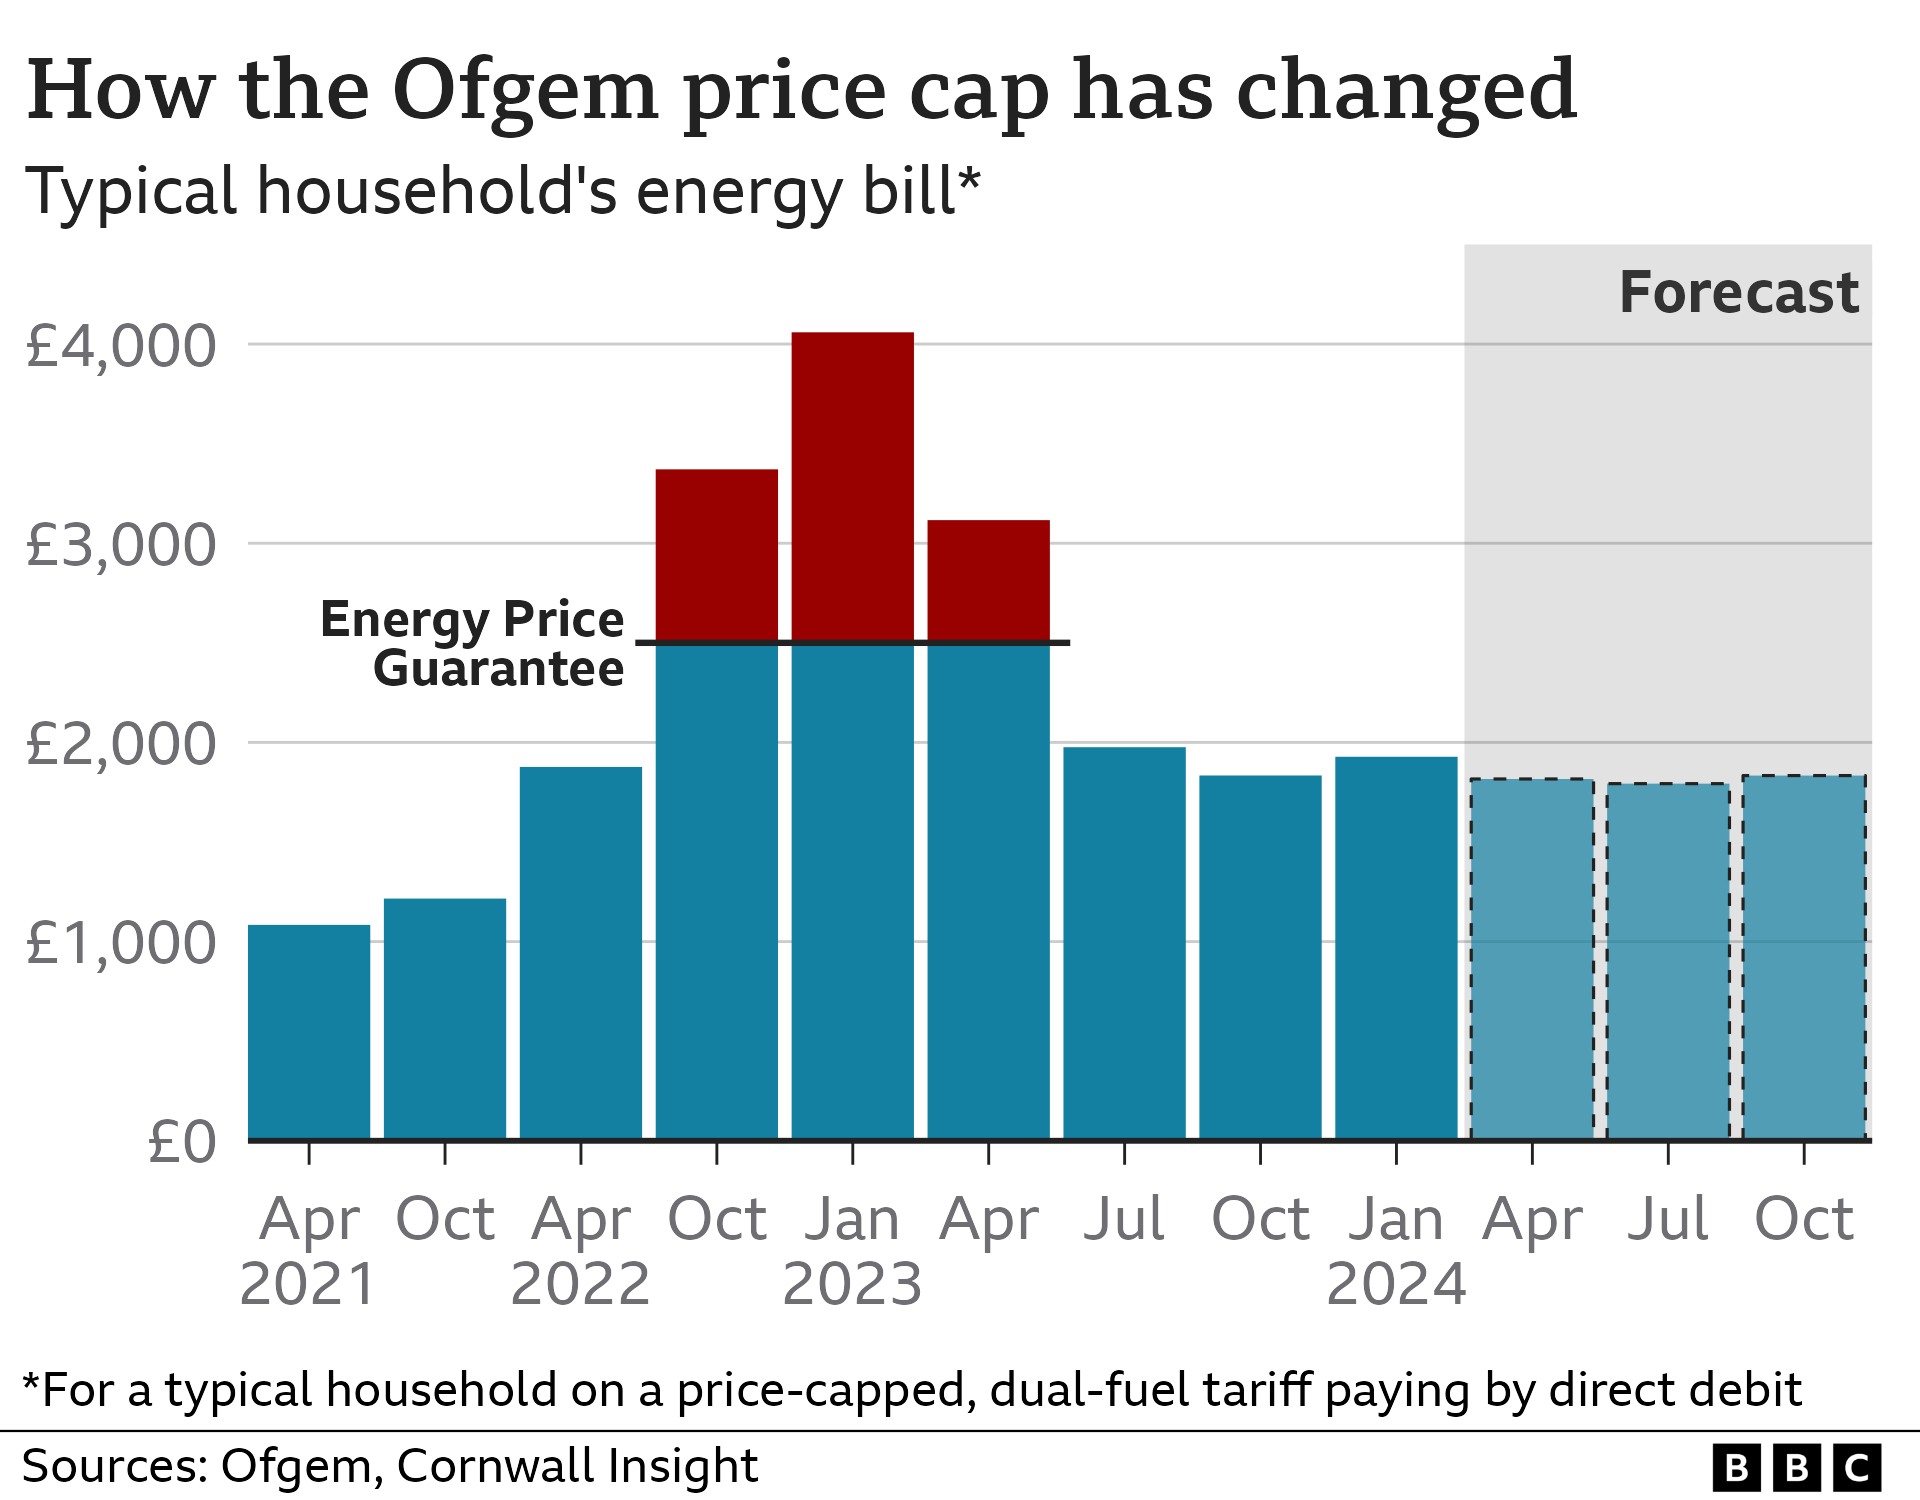 Chart showing the Ofgem price cap for a typical household on a price-capped dual-fuel tariff paying by direct debit will be about 1928 between January to March 2024